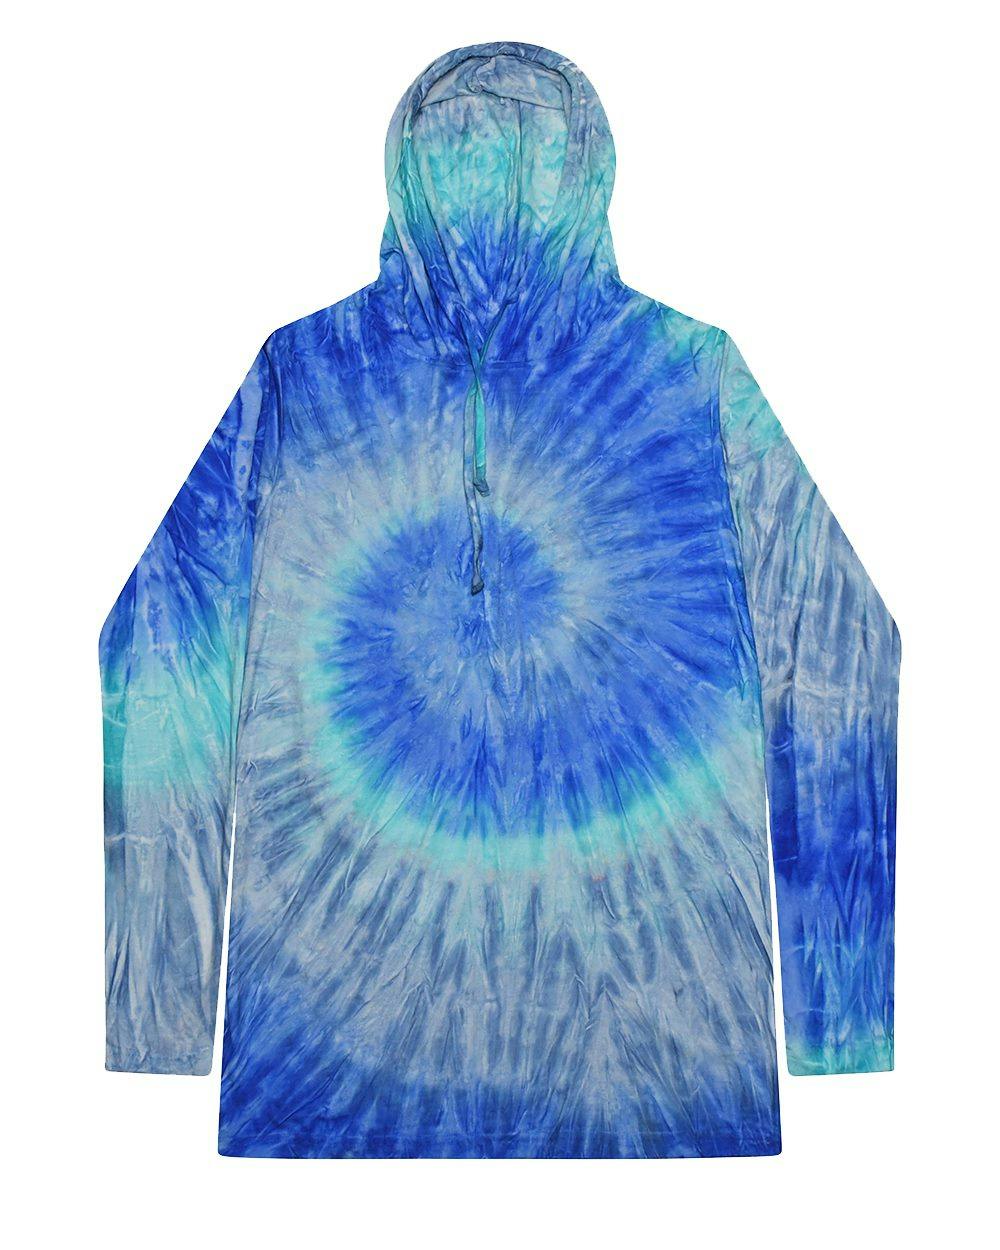 Image for Tie-Dyed Hooded Long Sleeve T-Shirt - 2777